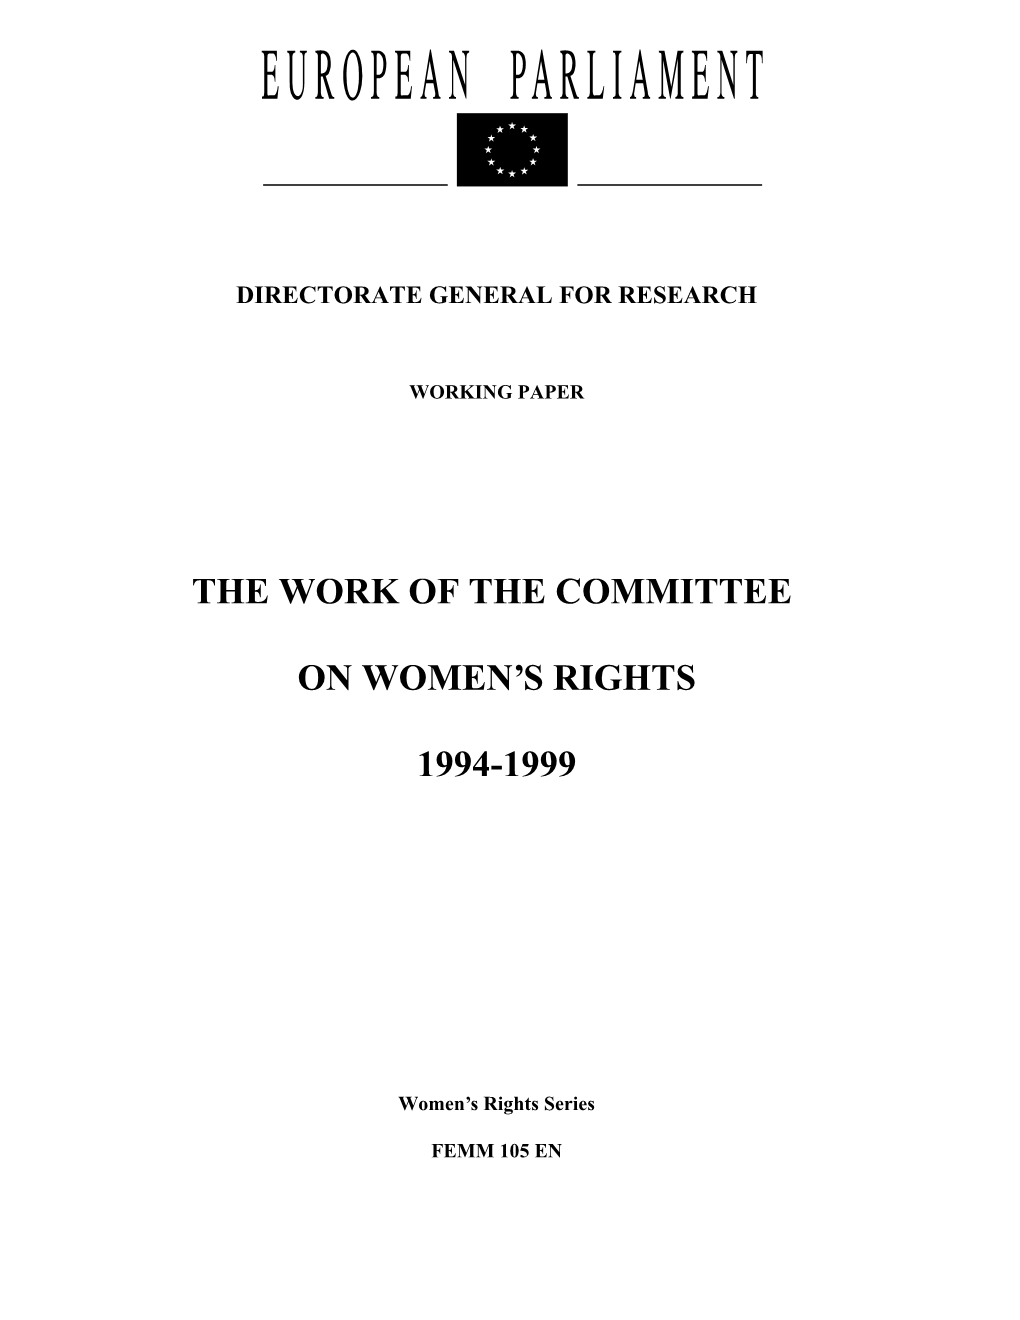 The Work of the Committee on Women's Rights 1994-1999